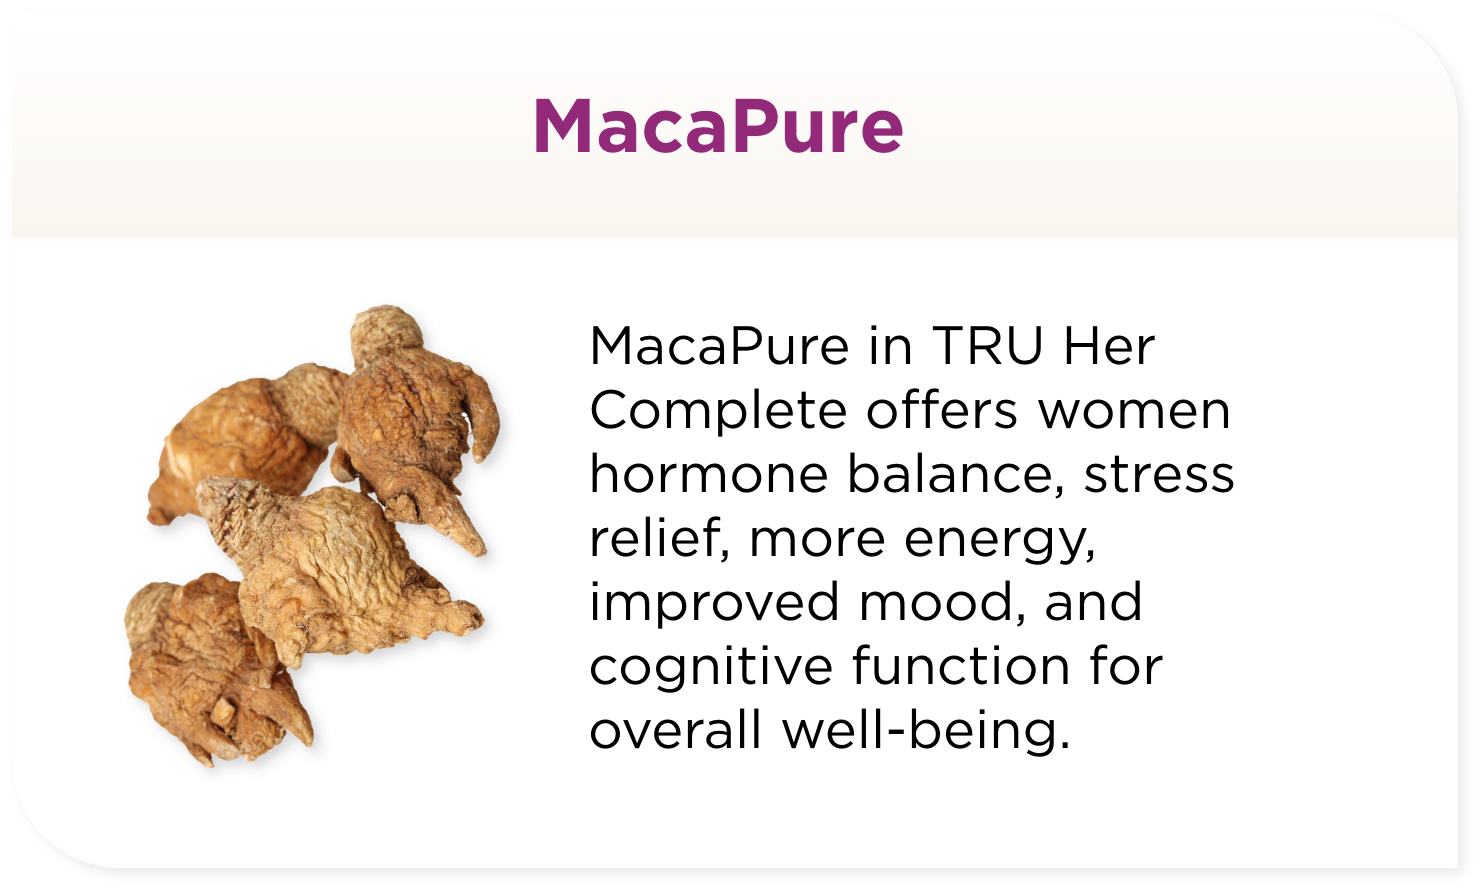 MacaPure in TRU Her Complete offers women hormone balance, stress relief, more energy, improved mood, and cognitive function for overall well-being.